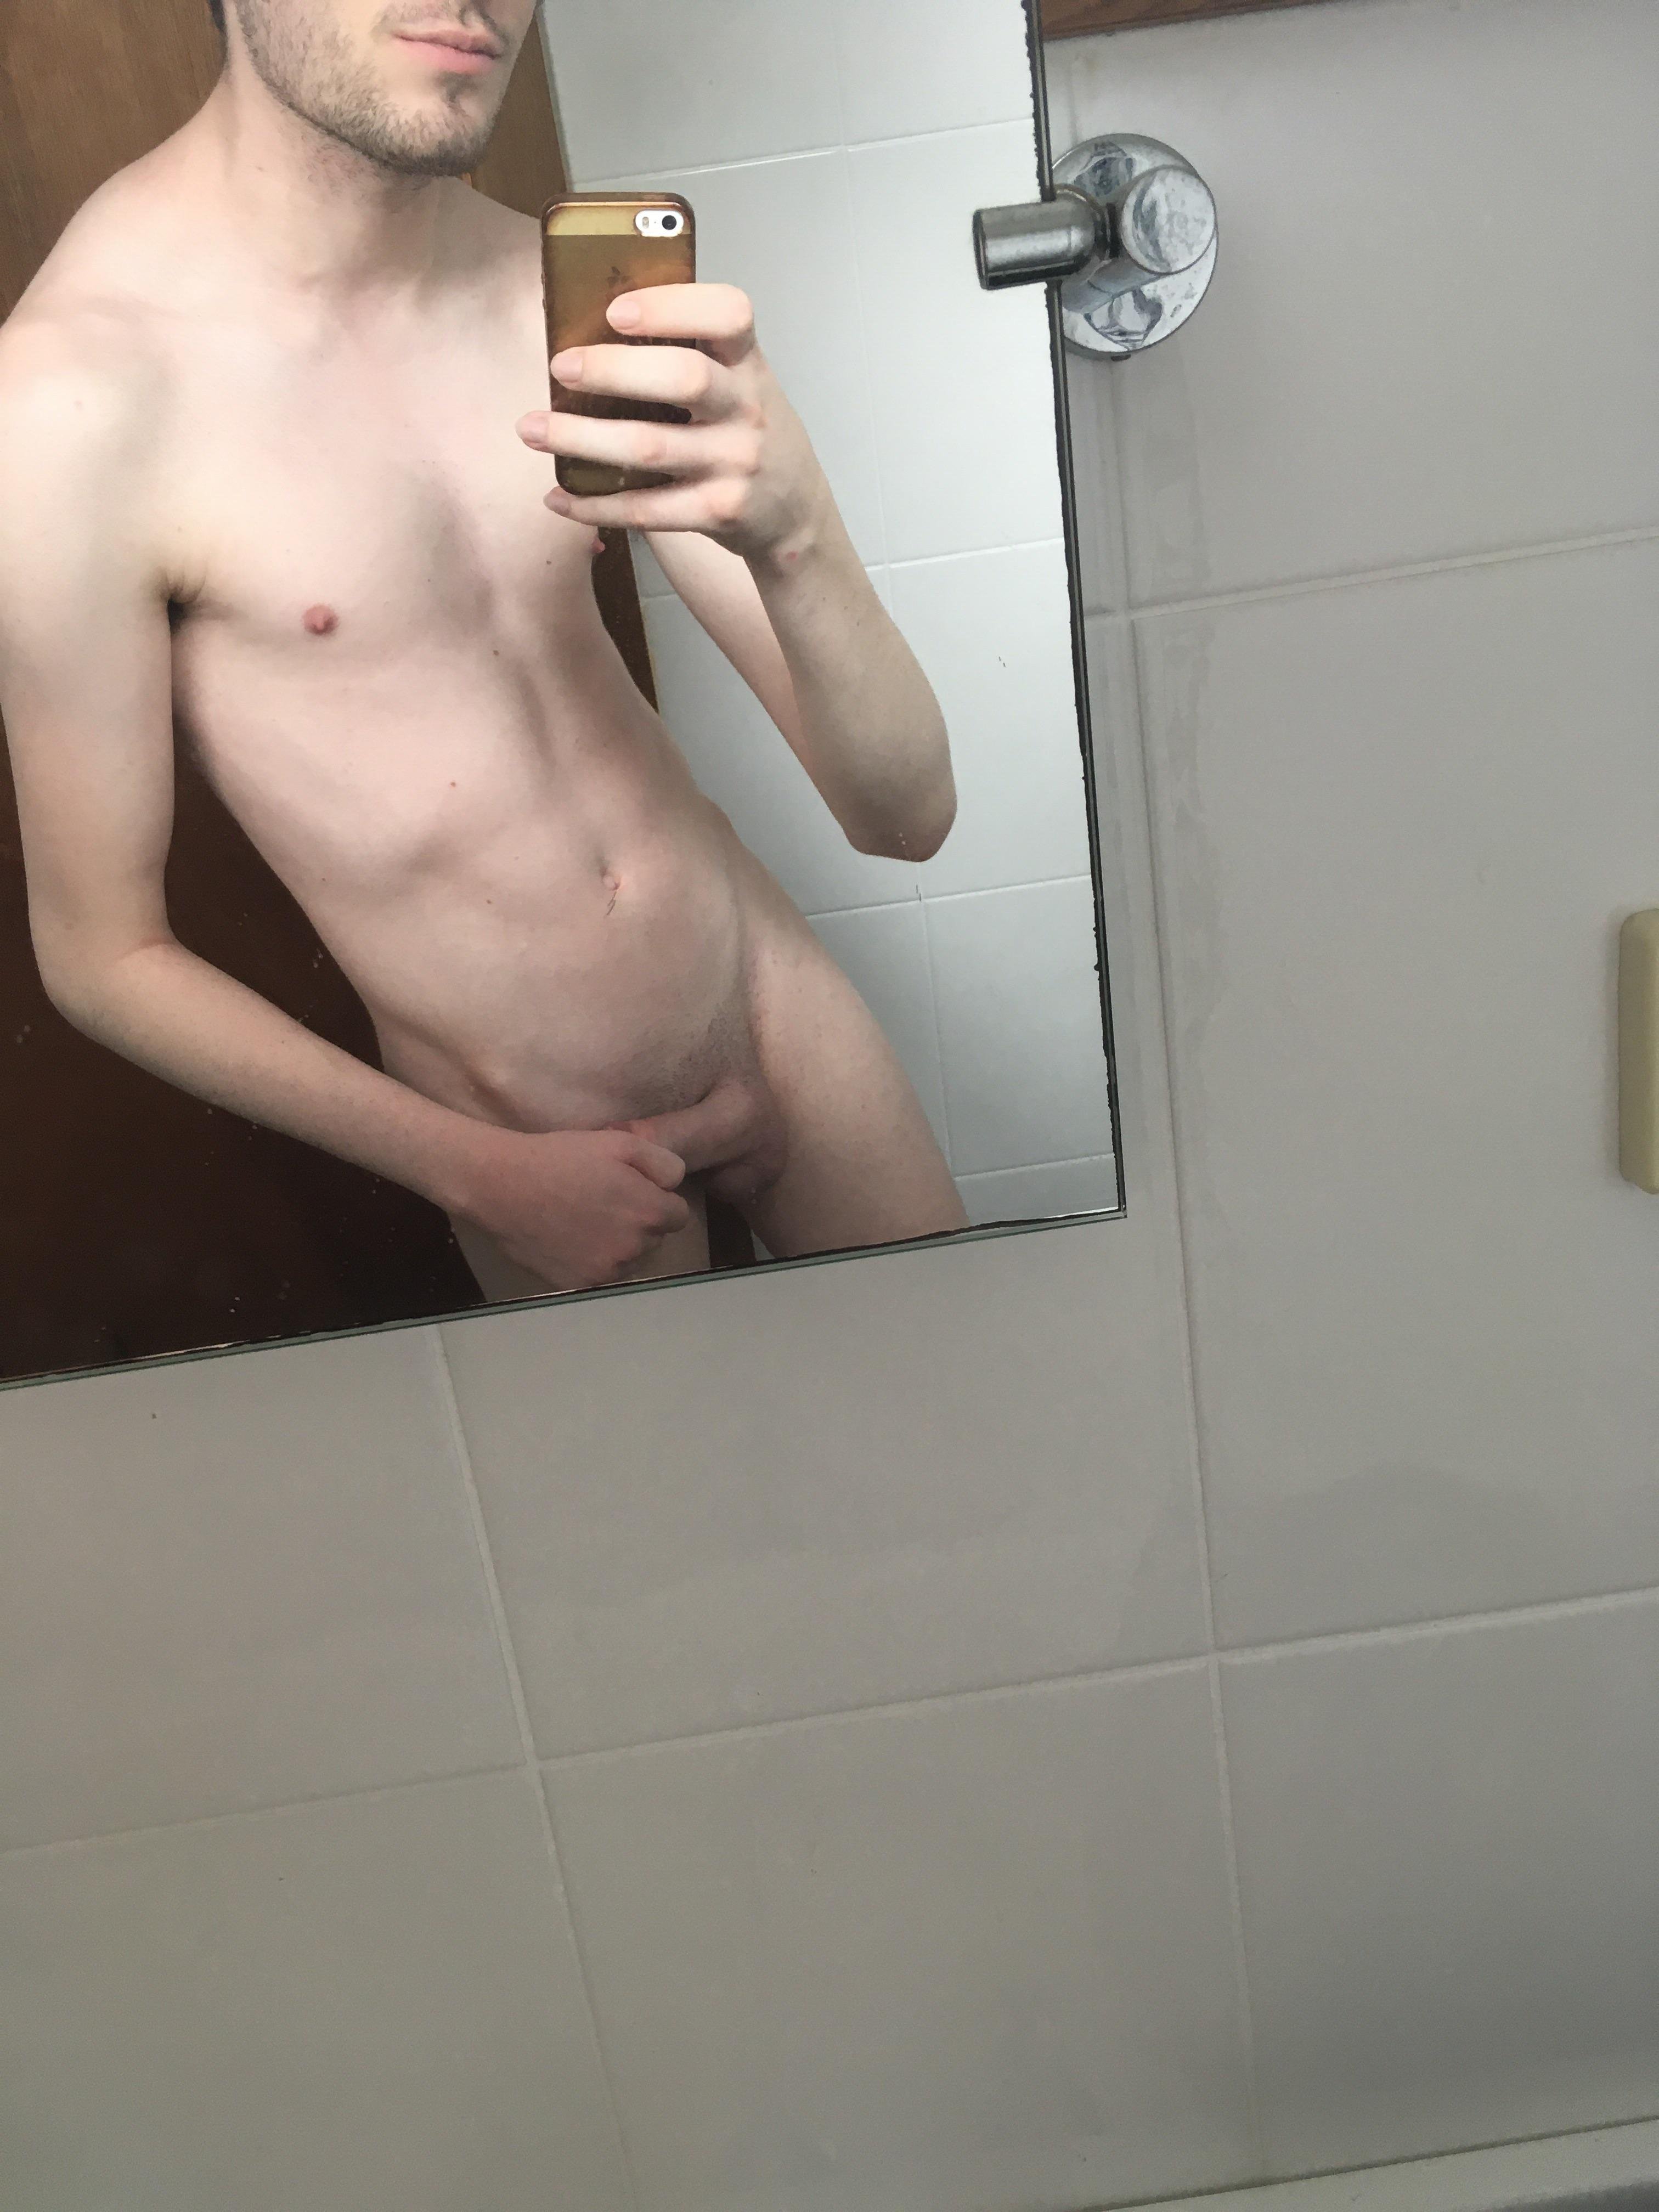 M4M 18 Australia. Just got out of the shower, wanna get dirty again? Snap: harry_bates99 looking for muscular/toned/athletic guys